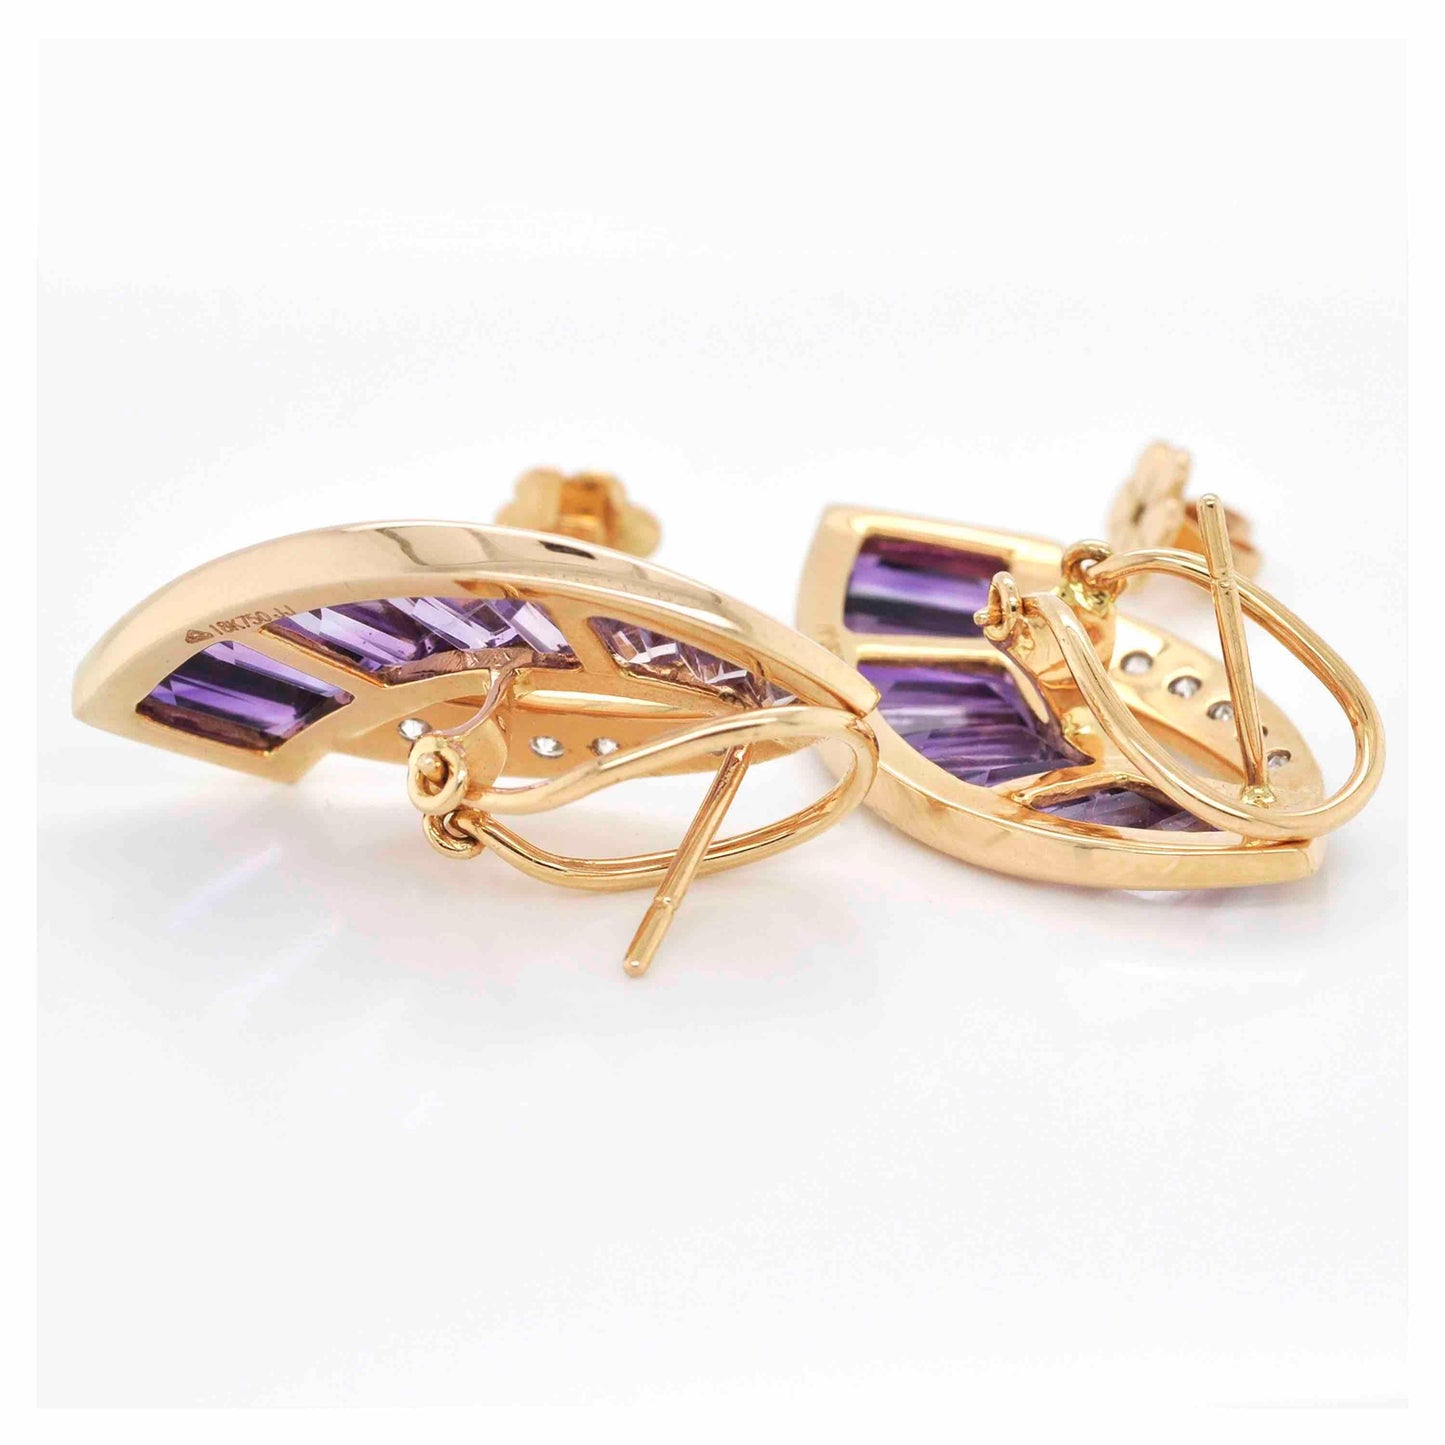 Taper baguette studs with amethyst gemstone